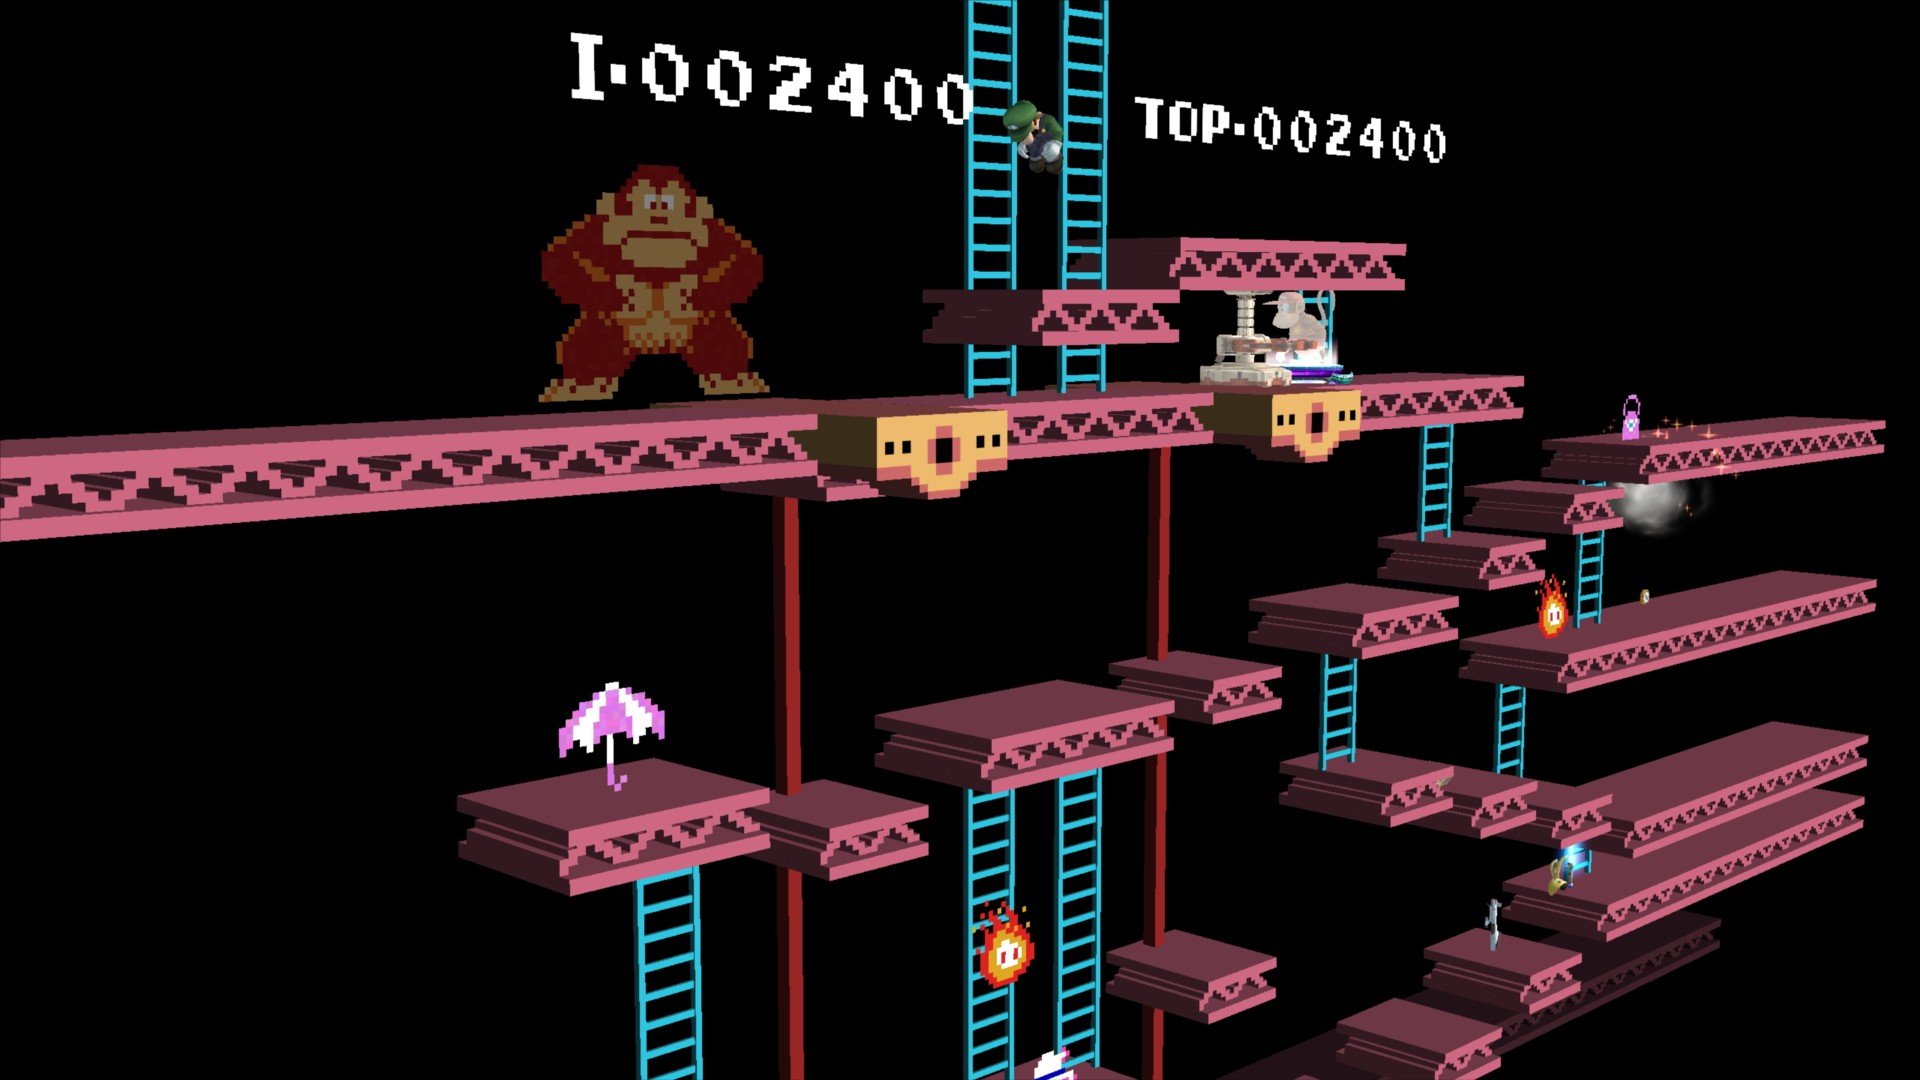 Download hd 1920x1080 Donkey Kong desktop background ID:319534 for free